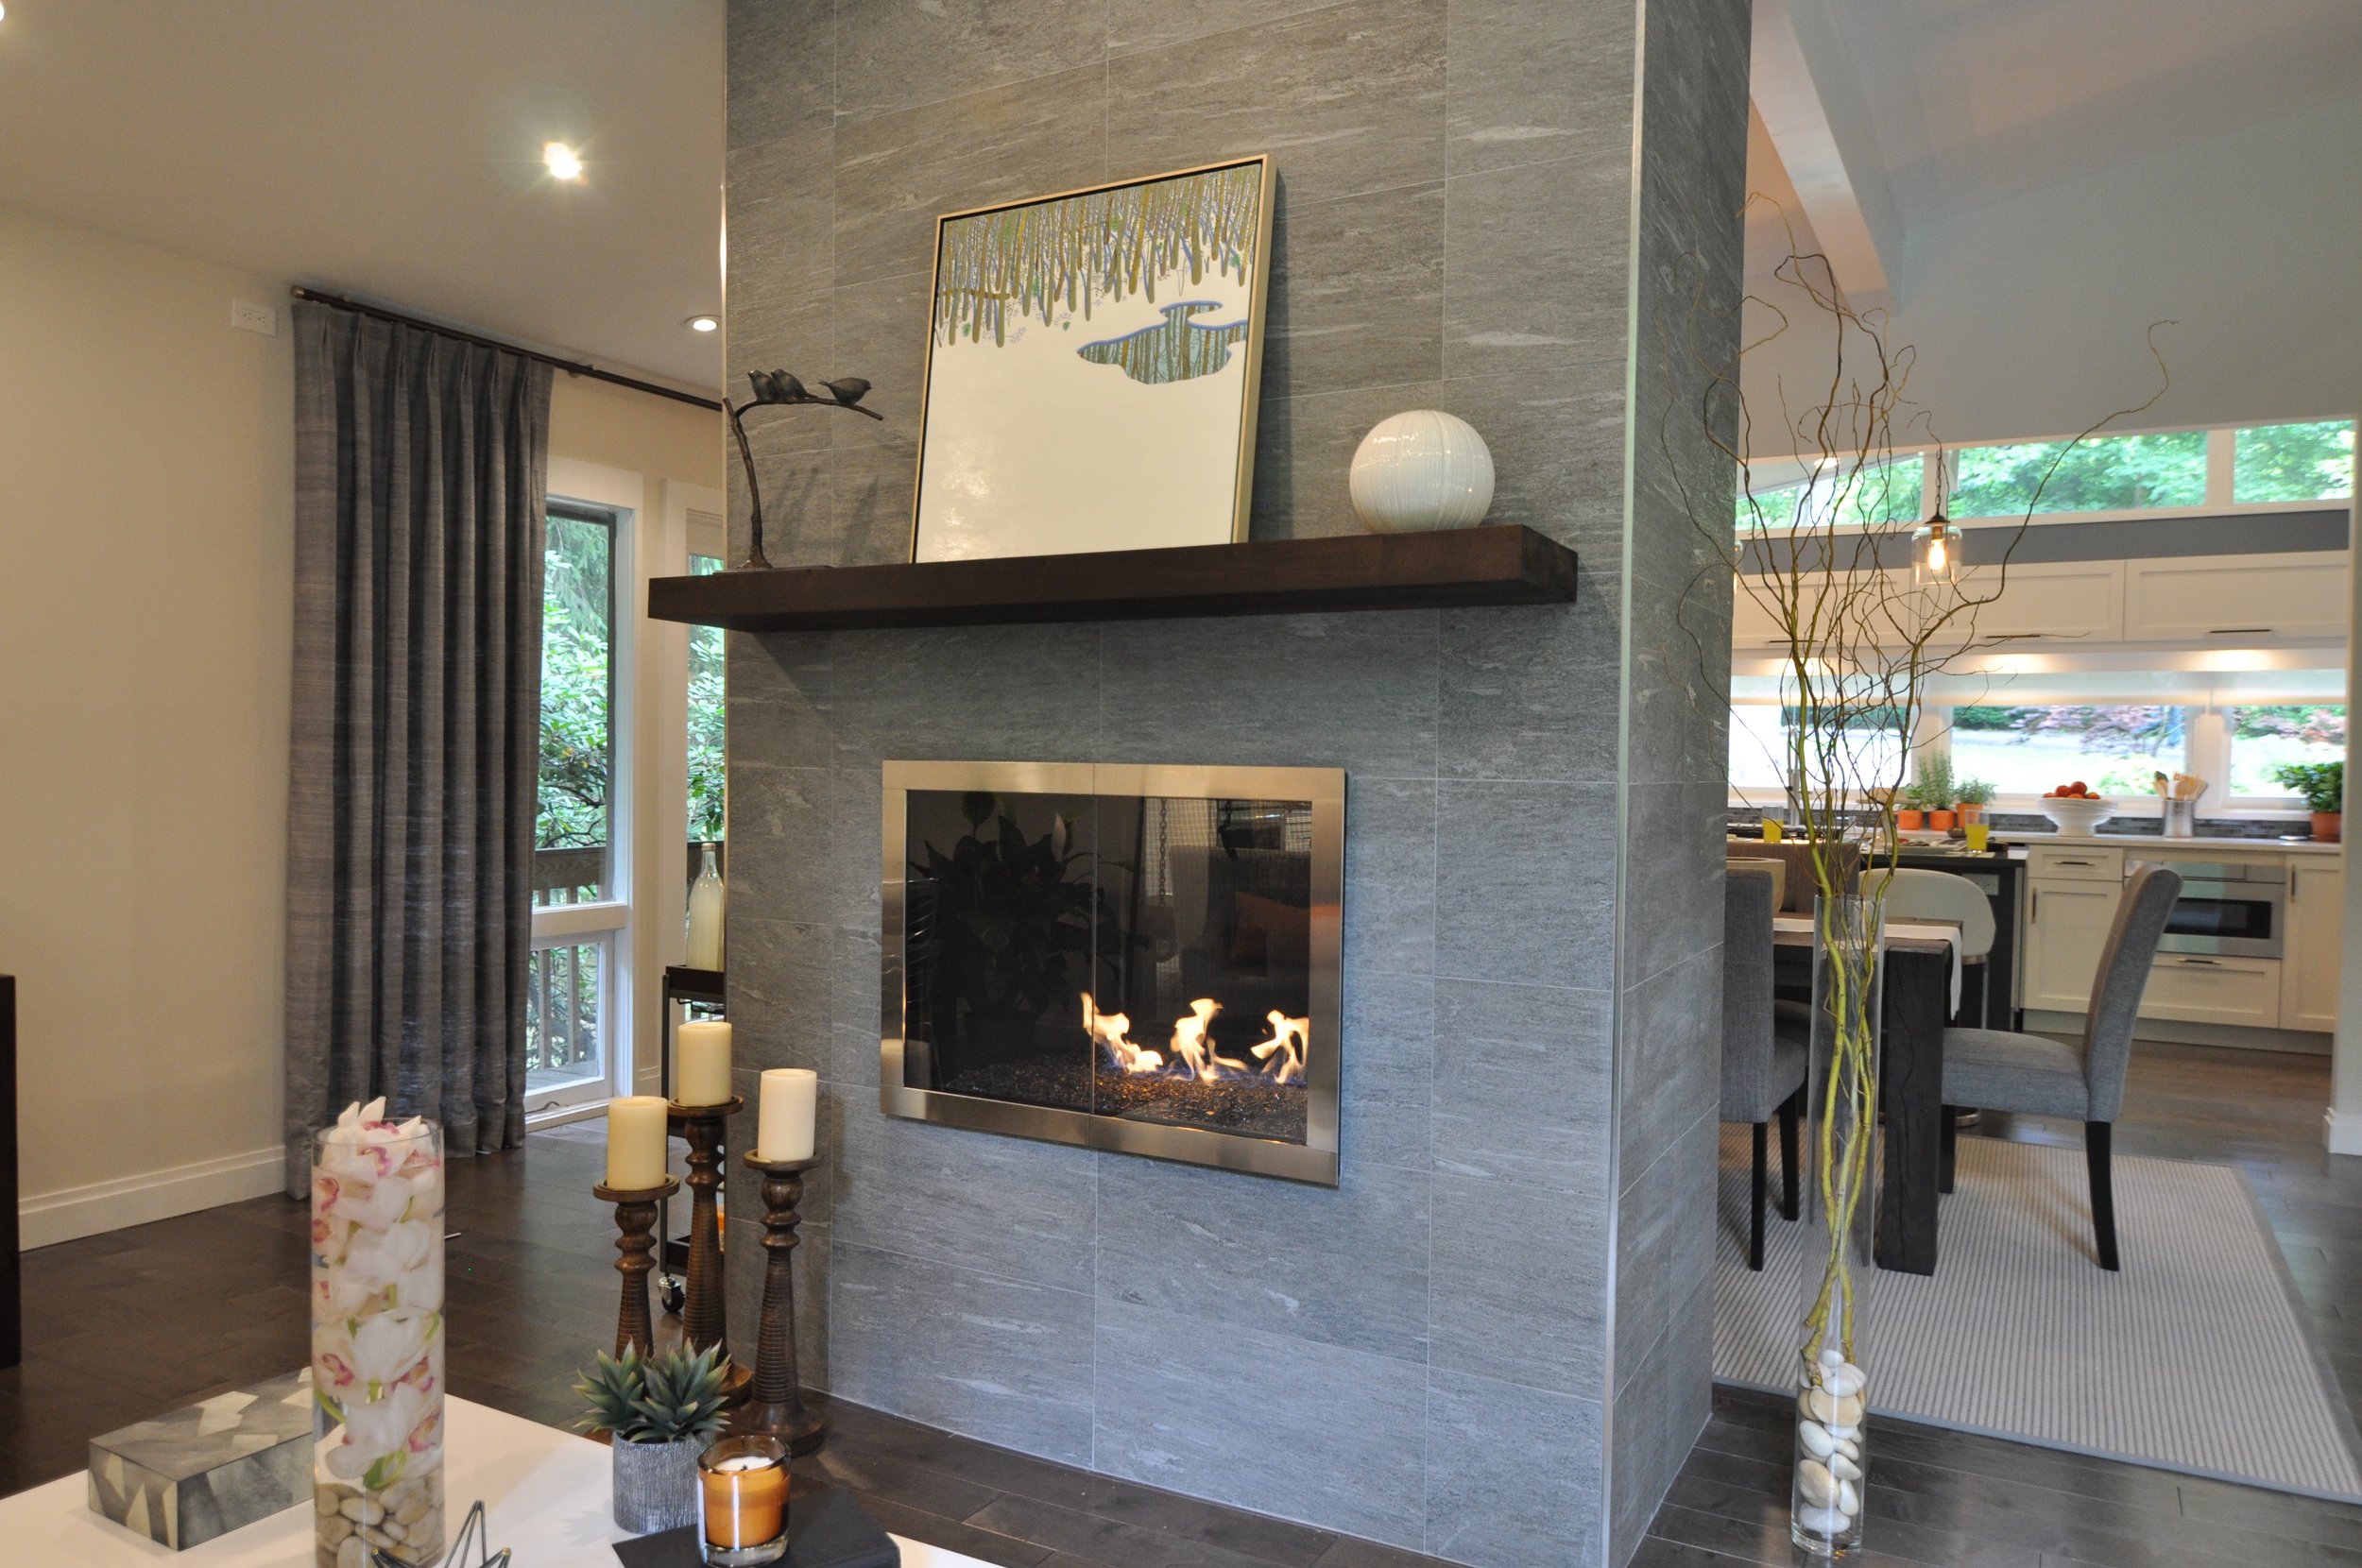 Kim A Mitchell_Design Lead_HGTV_The Property Brothers_Fireplace Tile Wall_Gas Fireplace_Mantel_Art.jpg